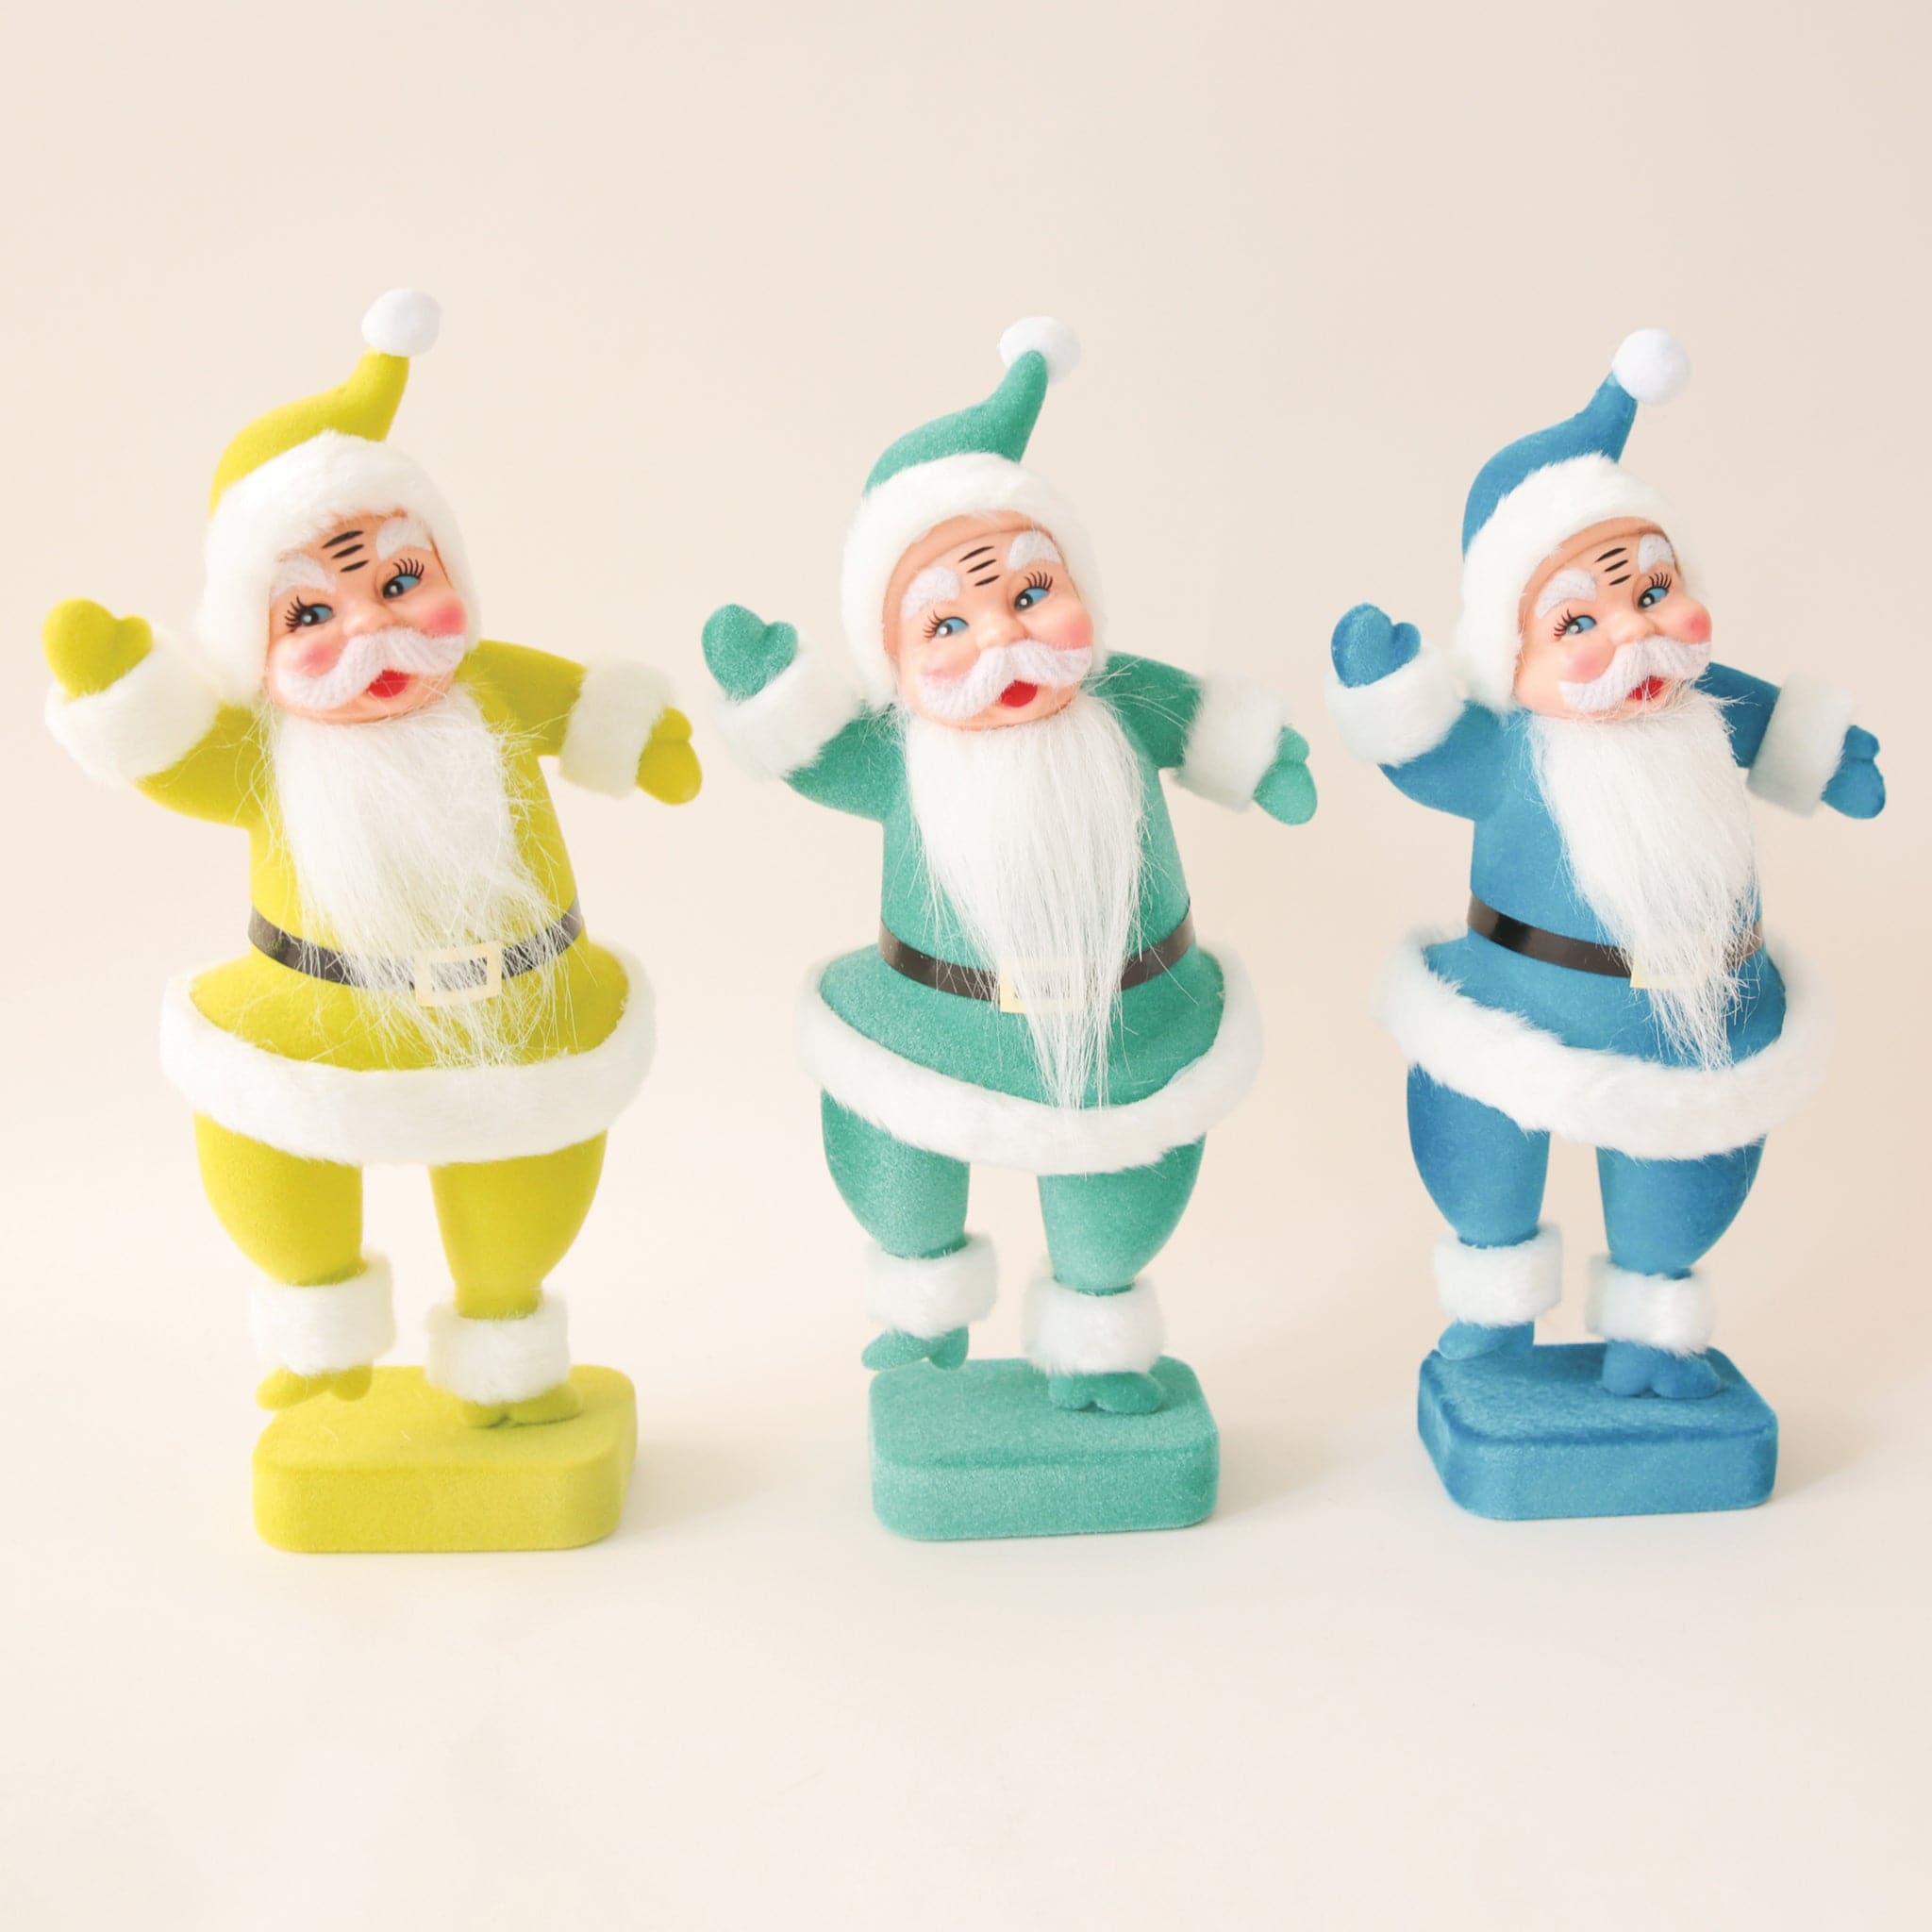 A plastic Santa figurine with a teal suit on with fuzzy cuffs and hat next to all the other colors available.